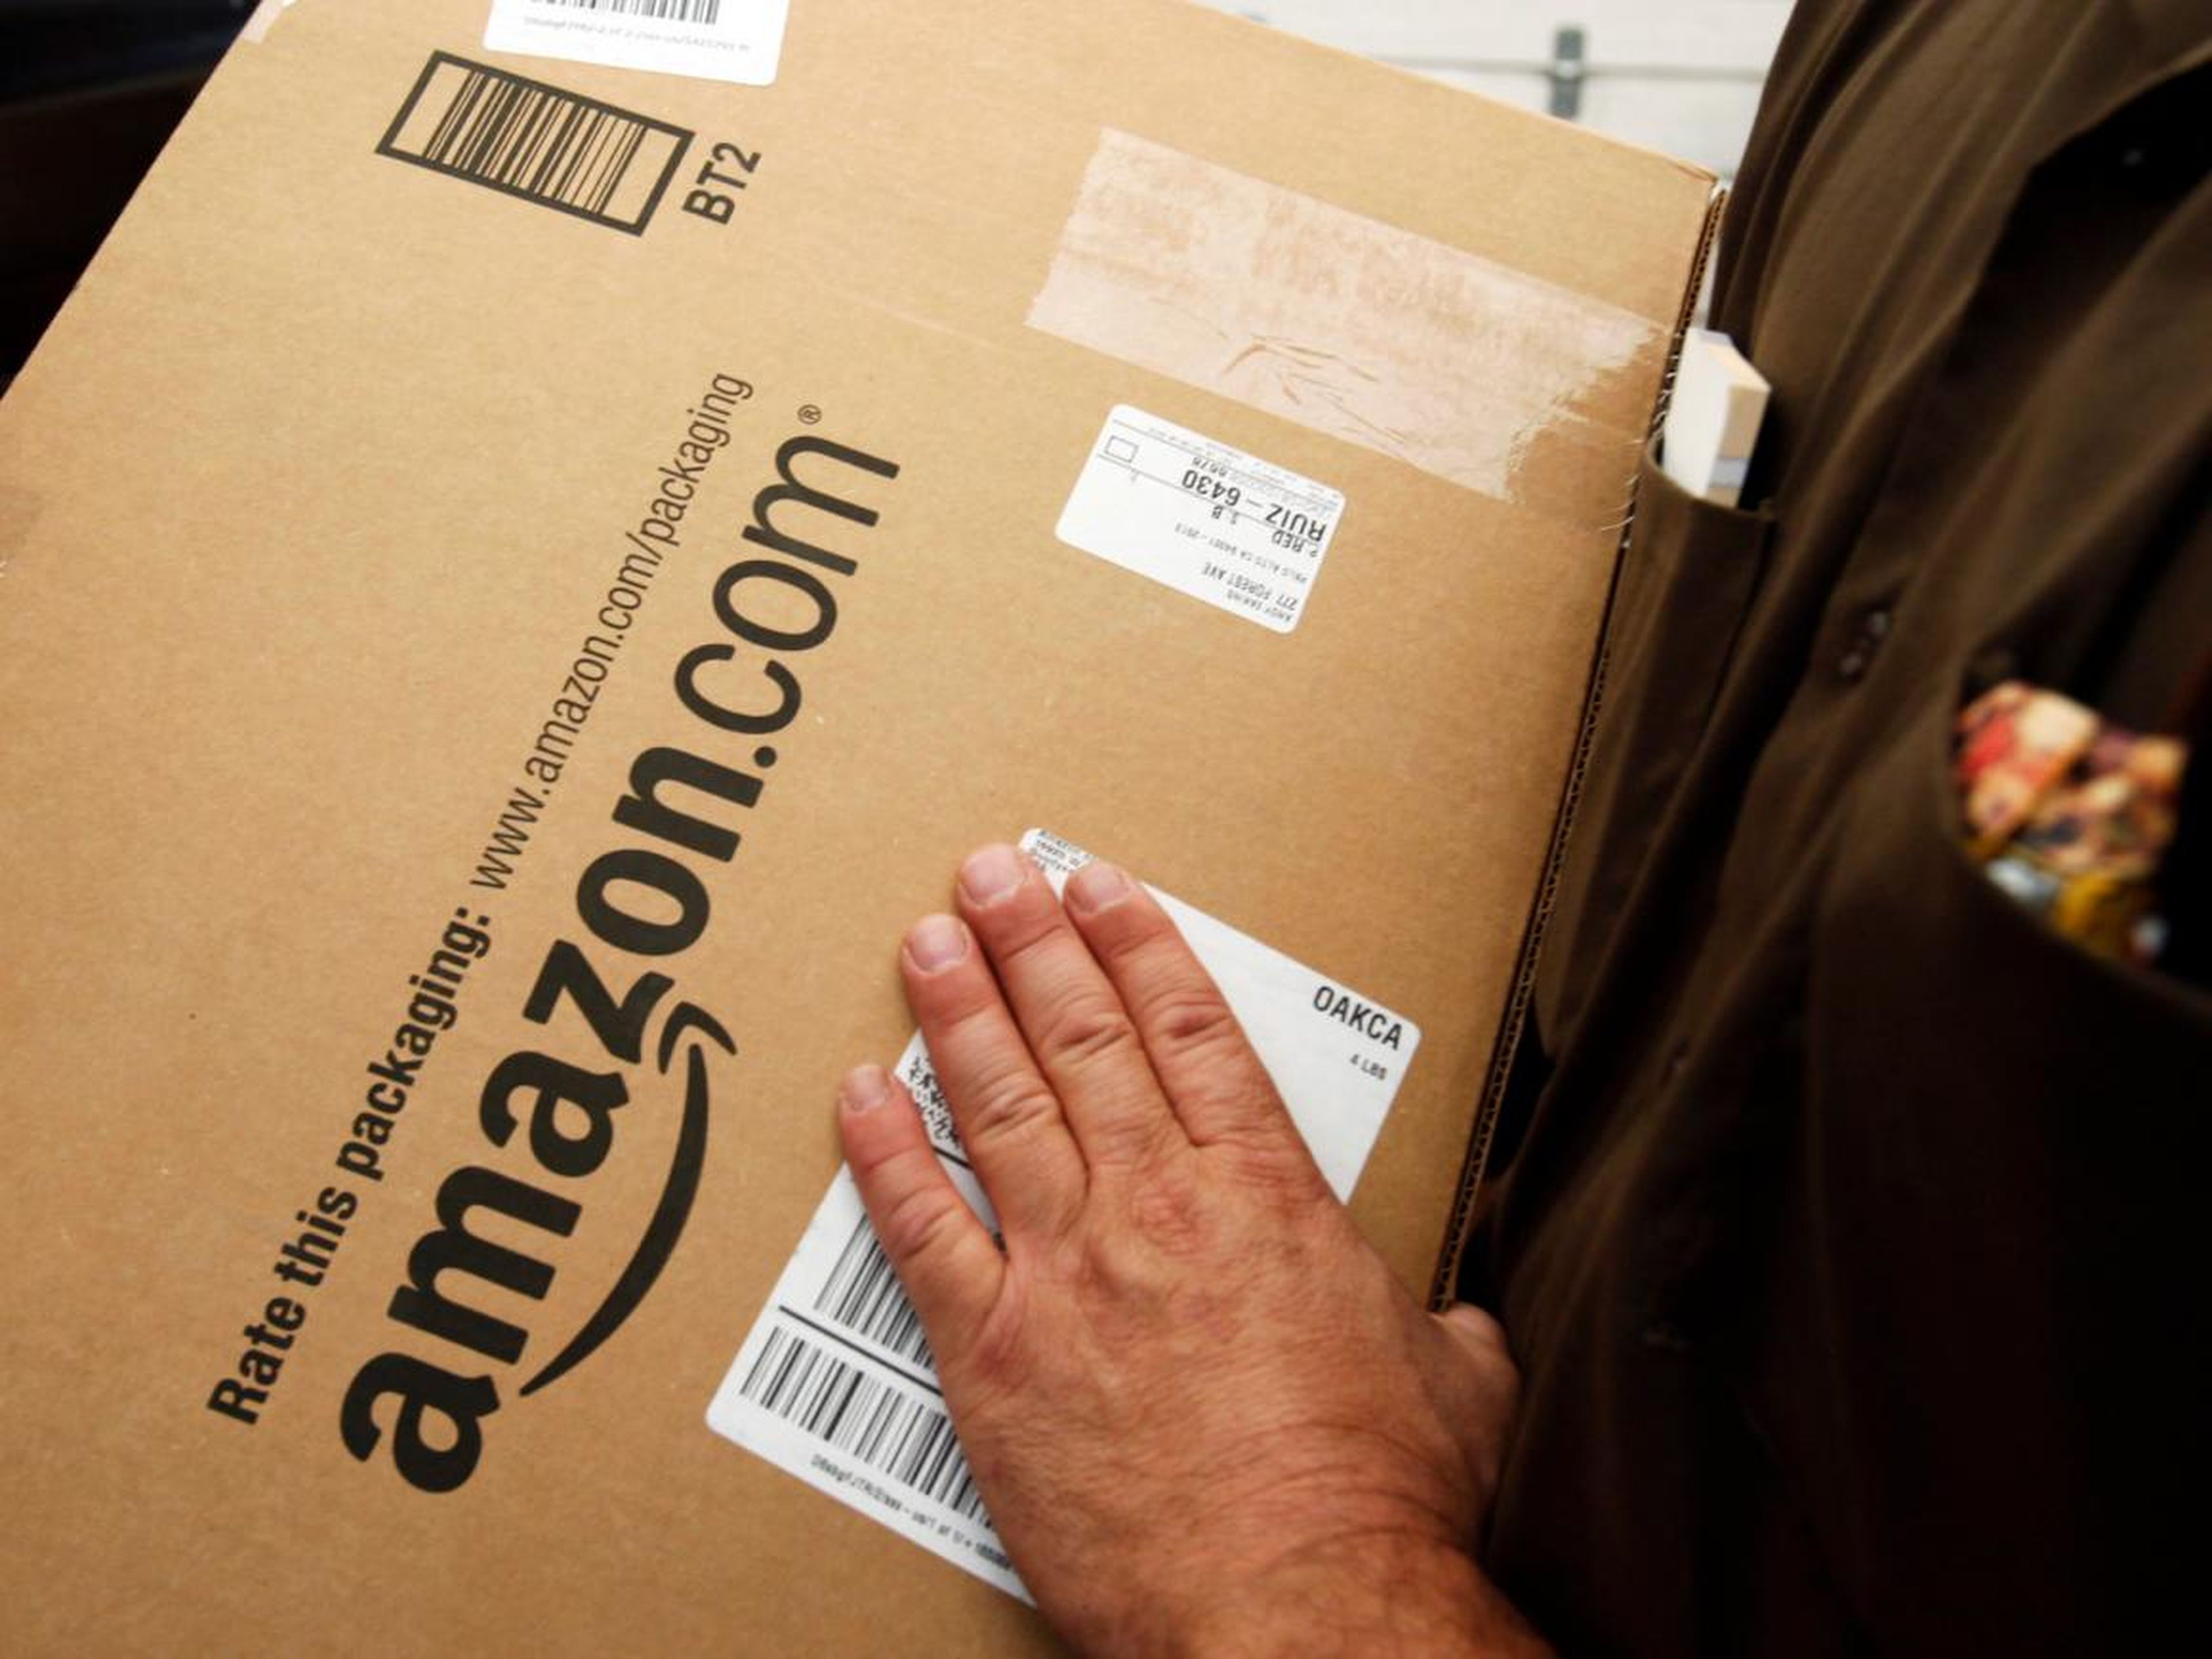 Amazon plants fake packages on delivery trucks, sources told Business Insider.